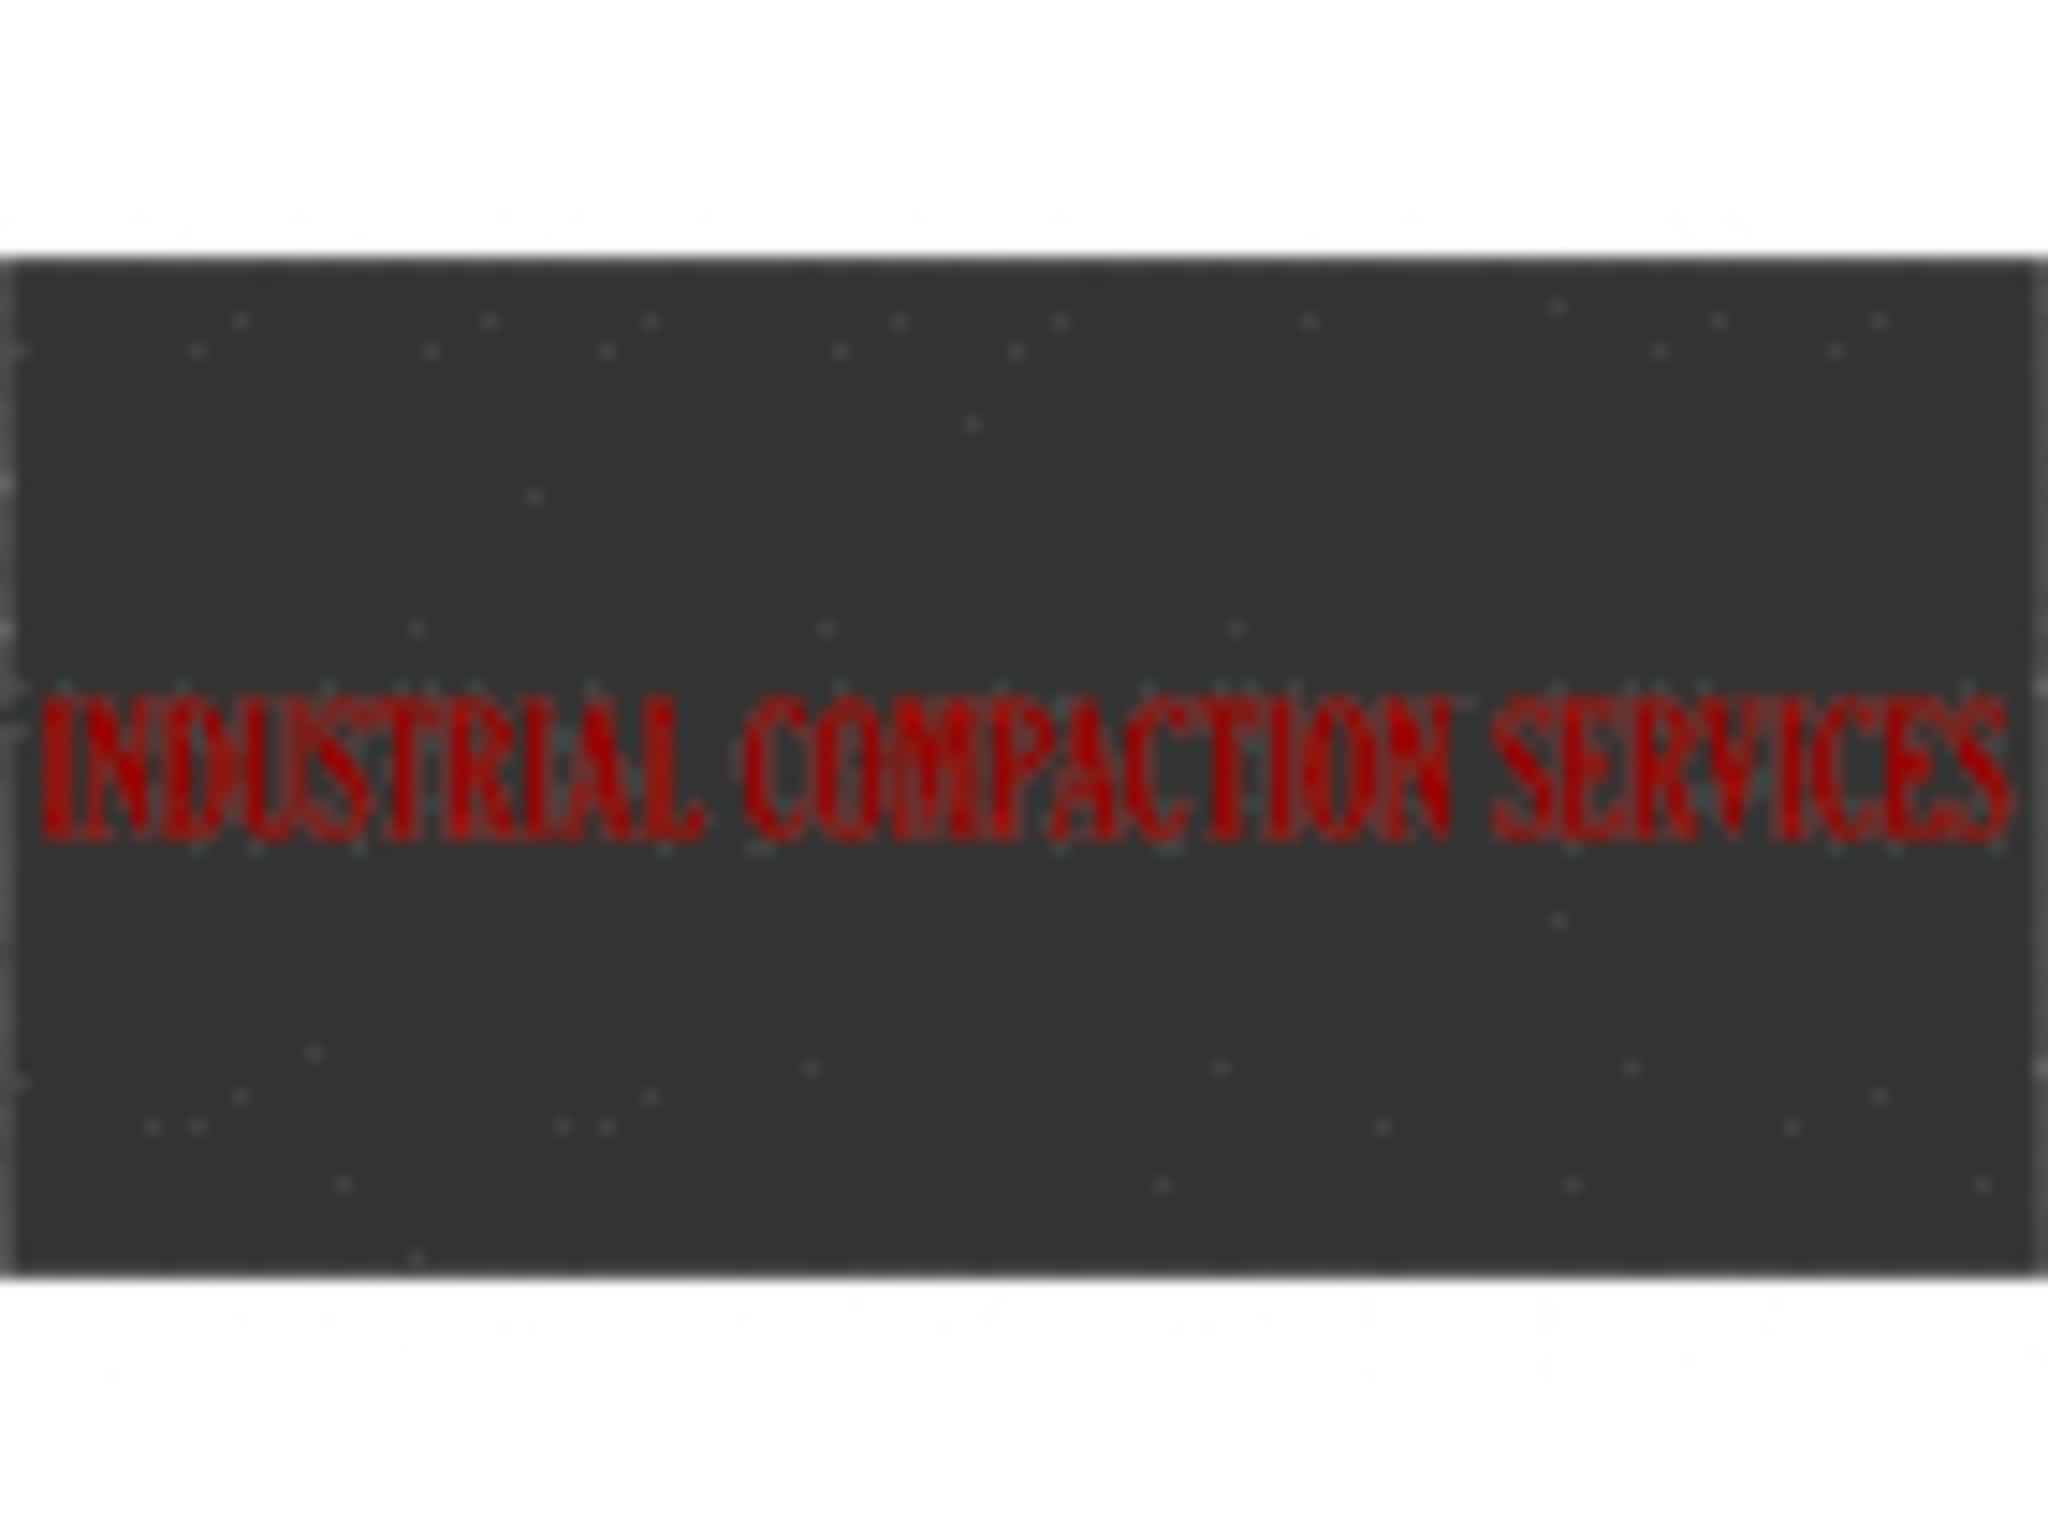 photo Industrial Compaction Services